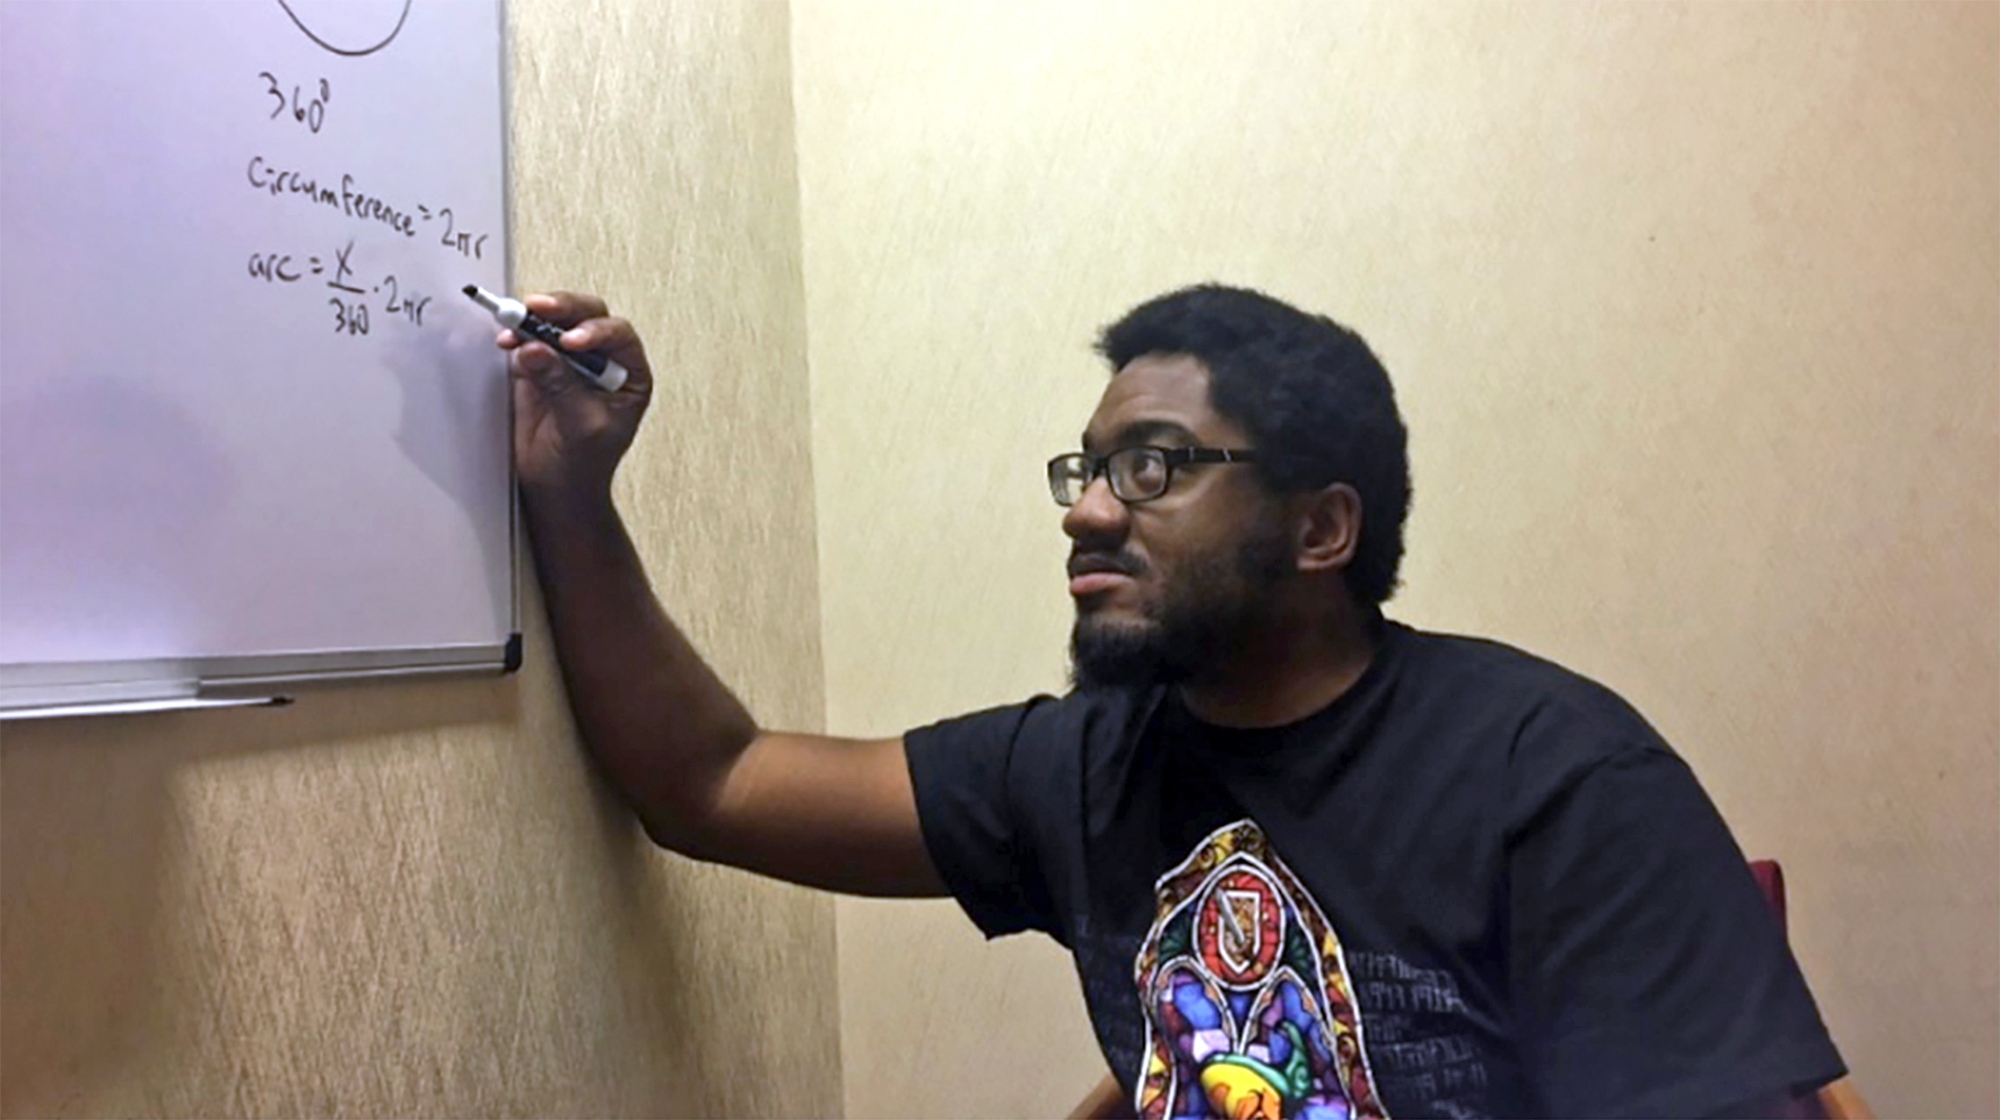 Shareef Jackson writes on a dry-erase board in a classroom